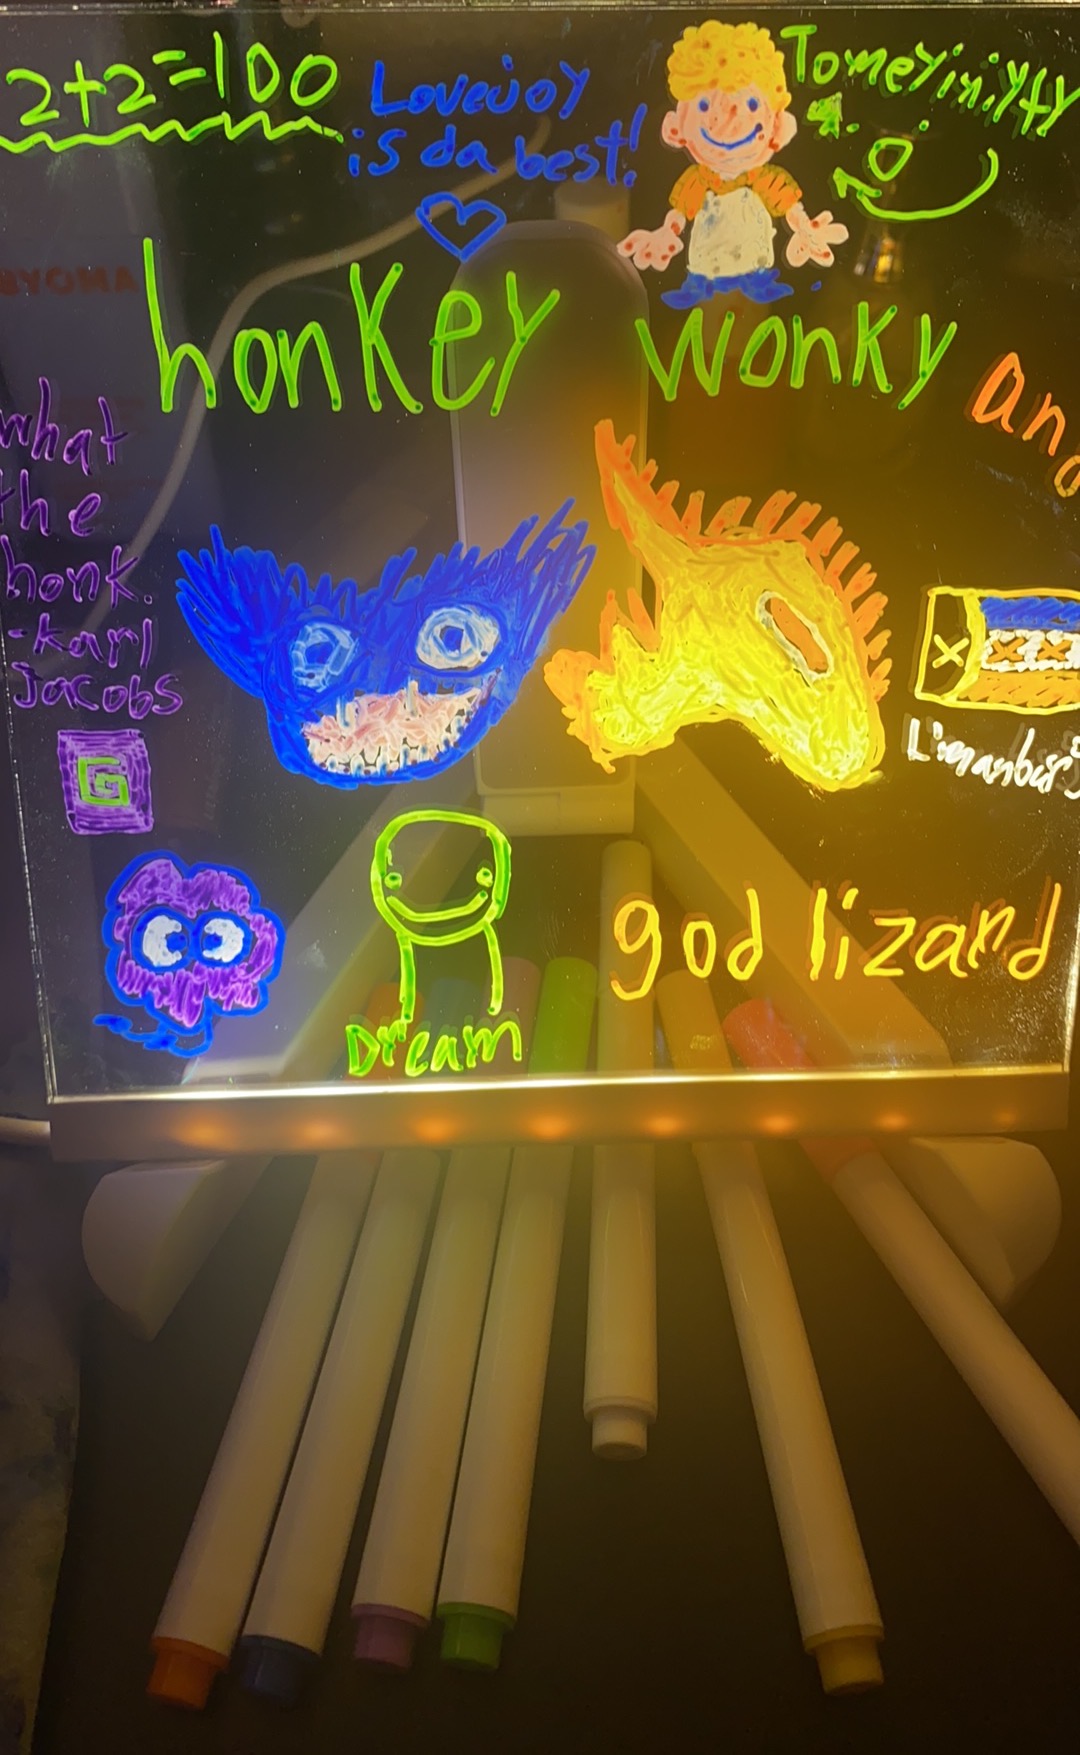 Children's LED Note Board with Colors